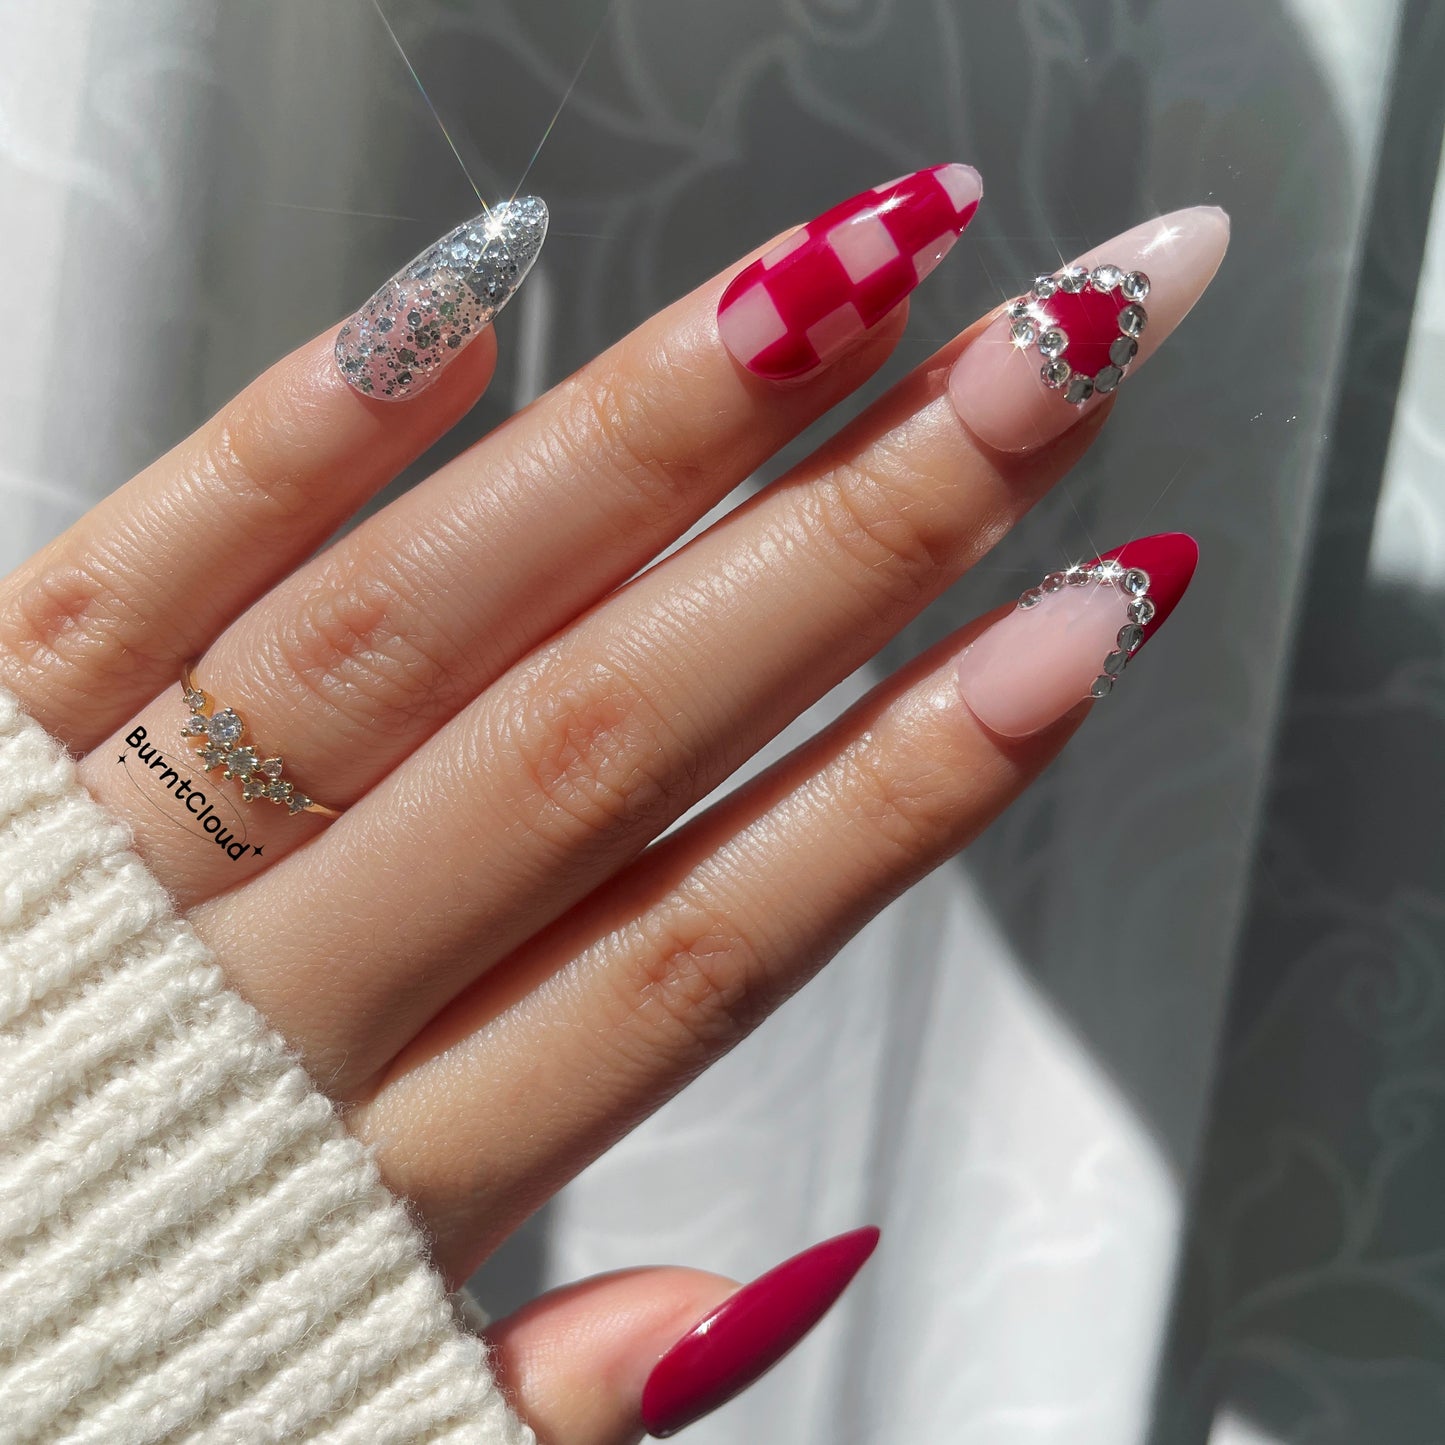 "Rich Girl" Luxury Red Flake Hearts Nails | 13 Custom Handpainted Press on Nails